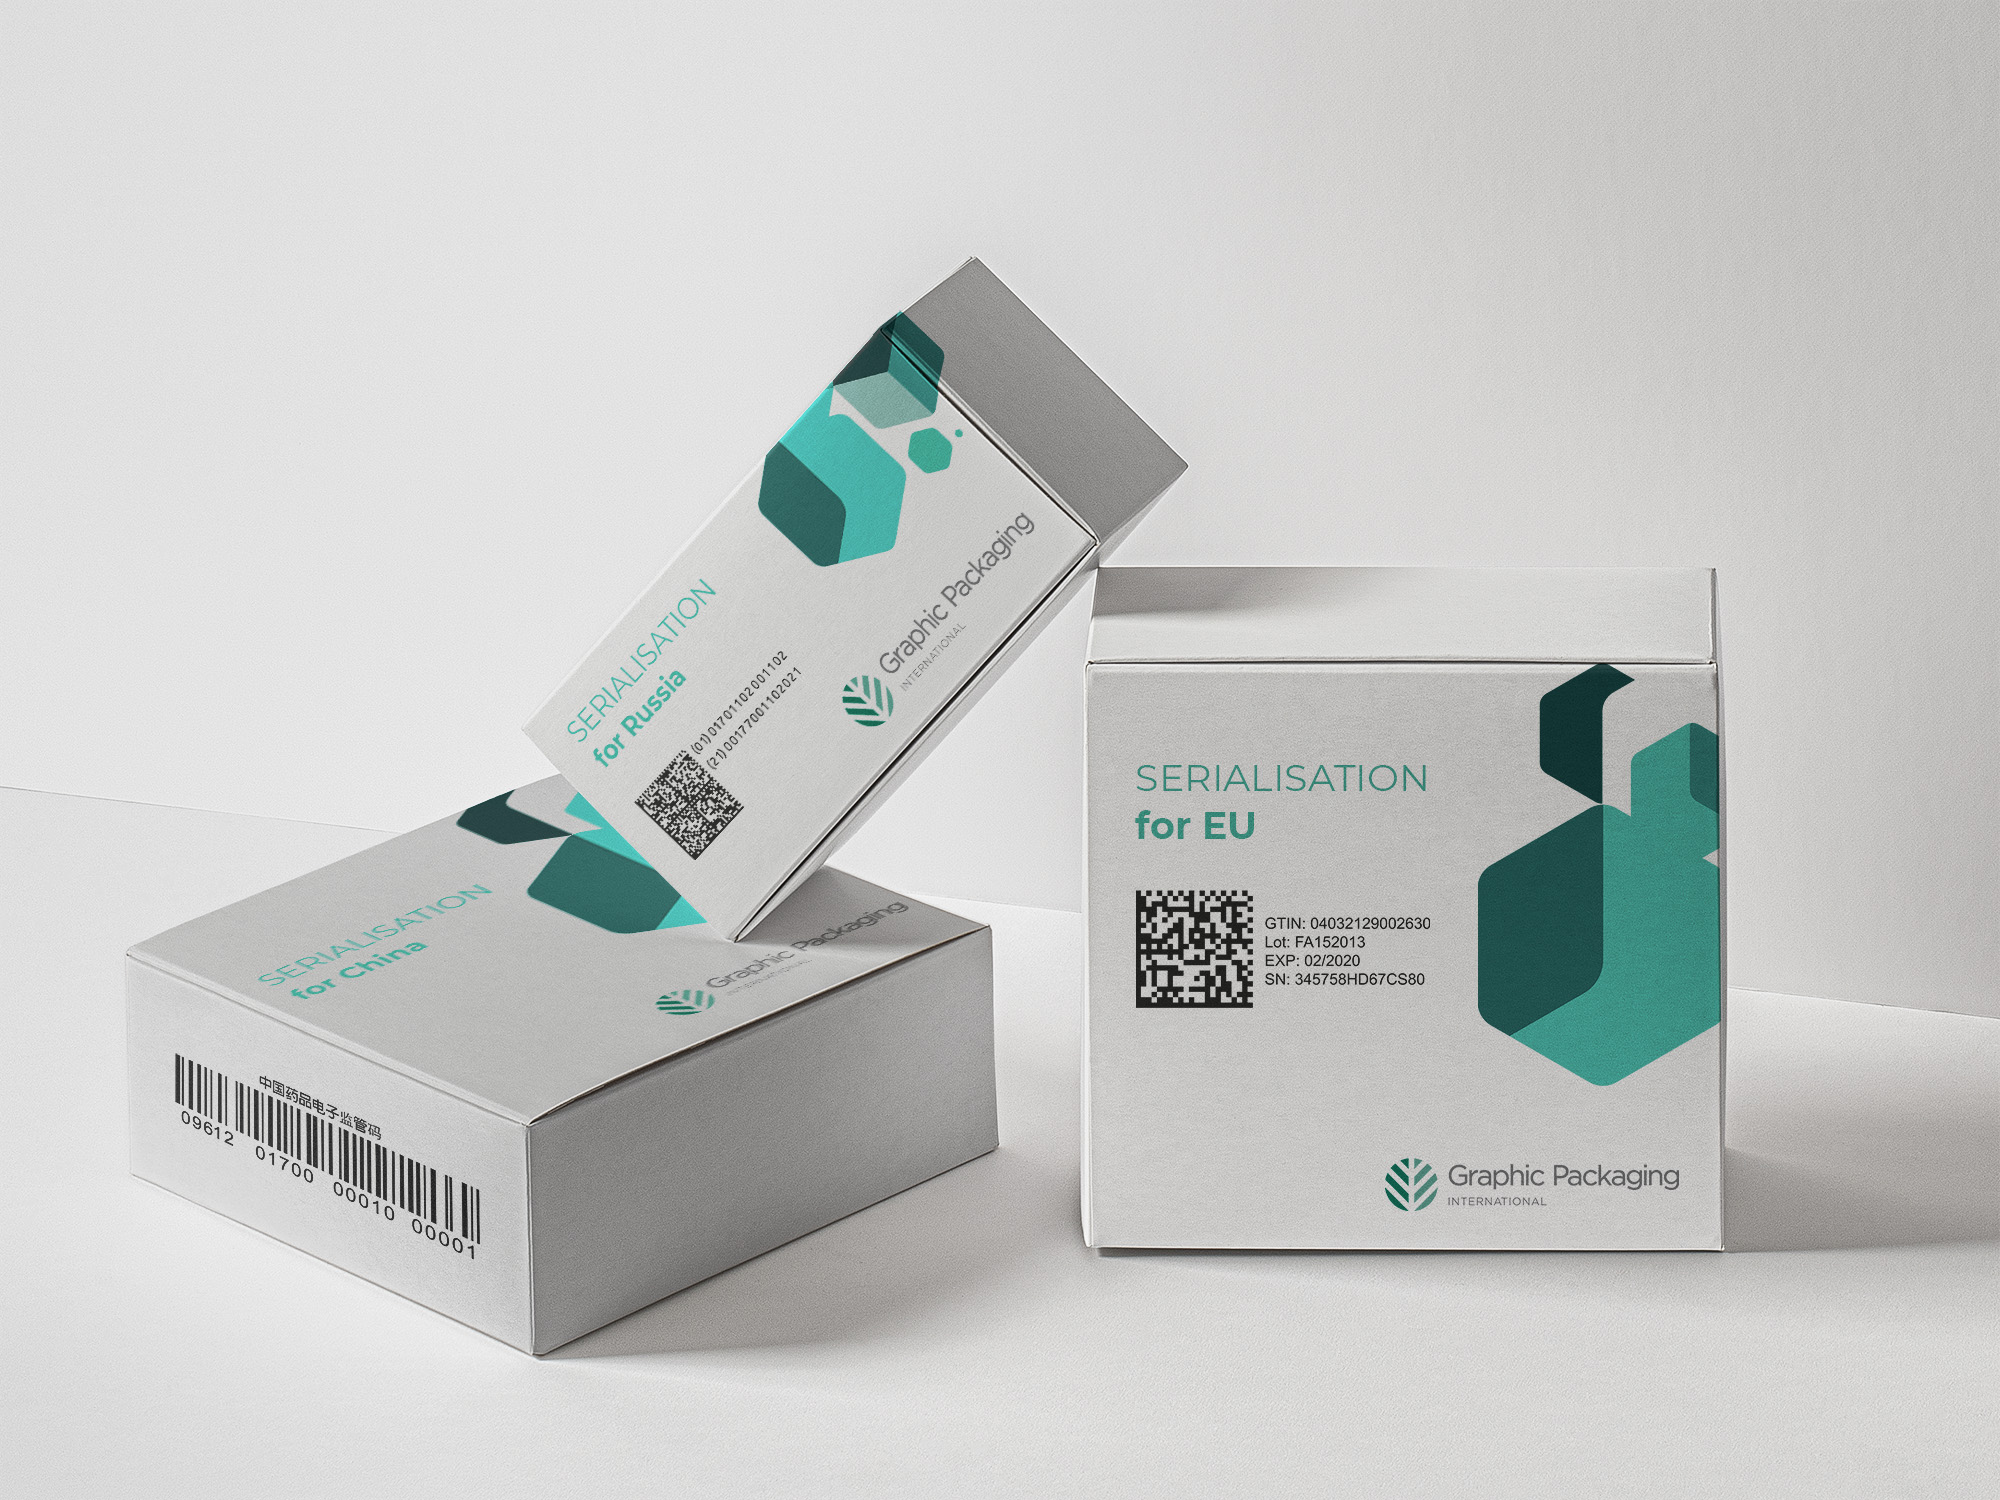 Serialisation and track & trace solutions for Healthcare